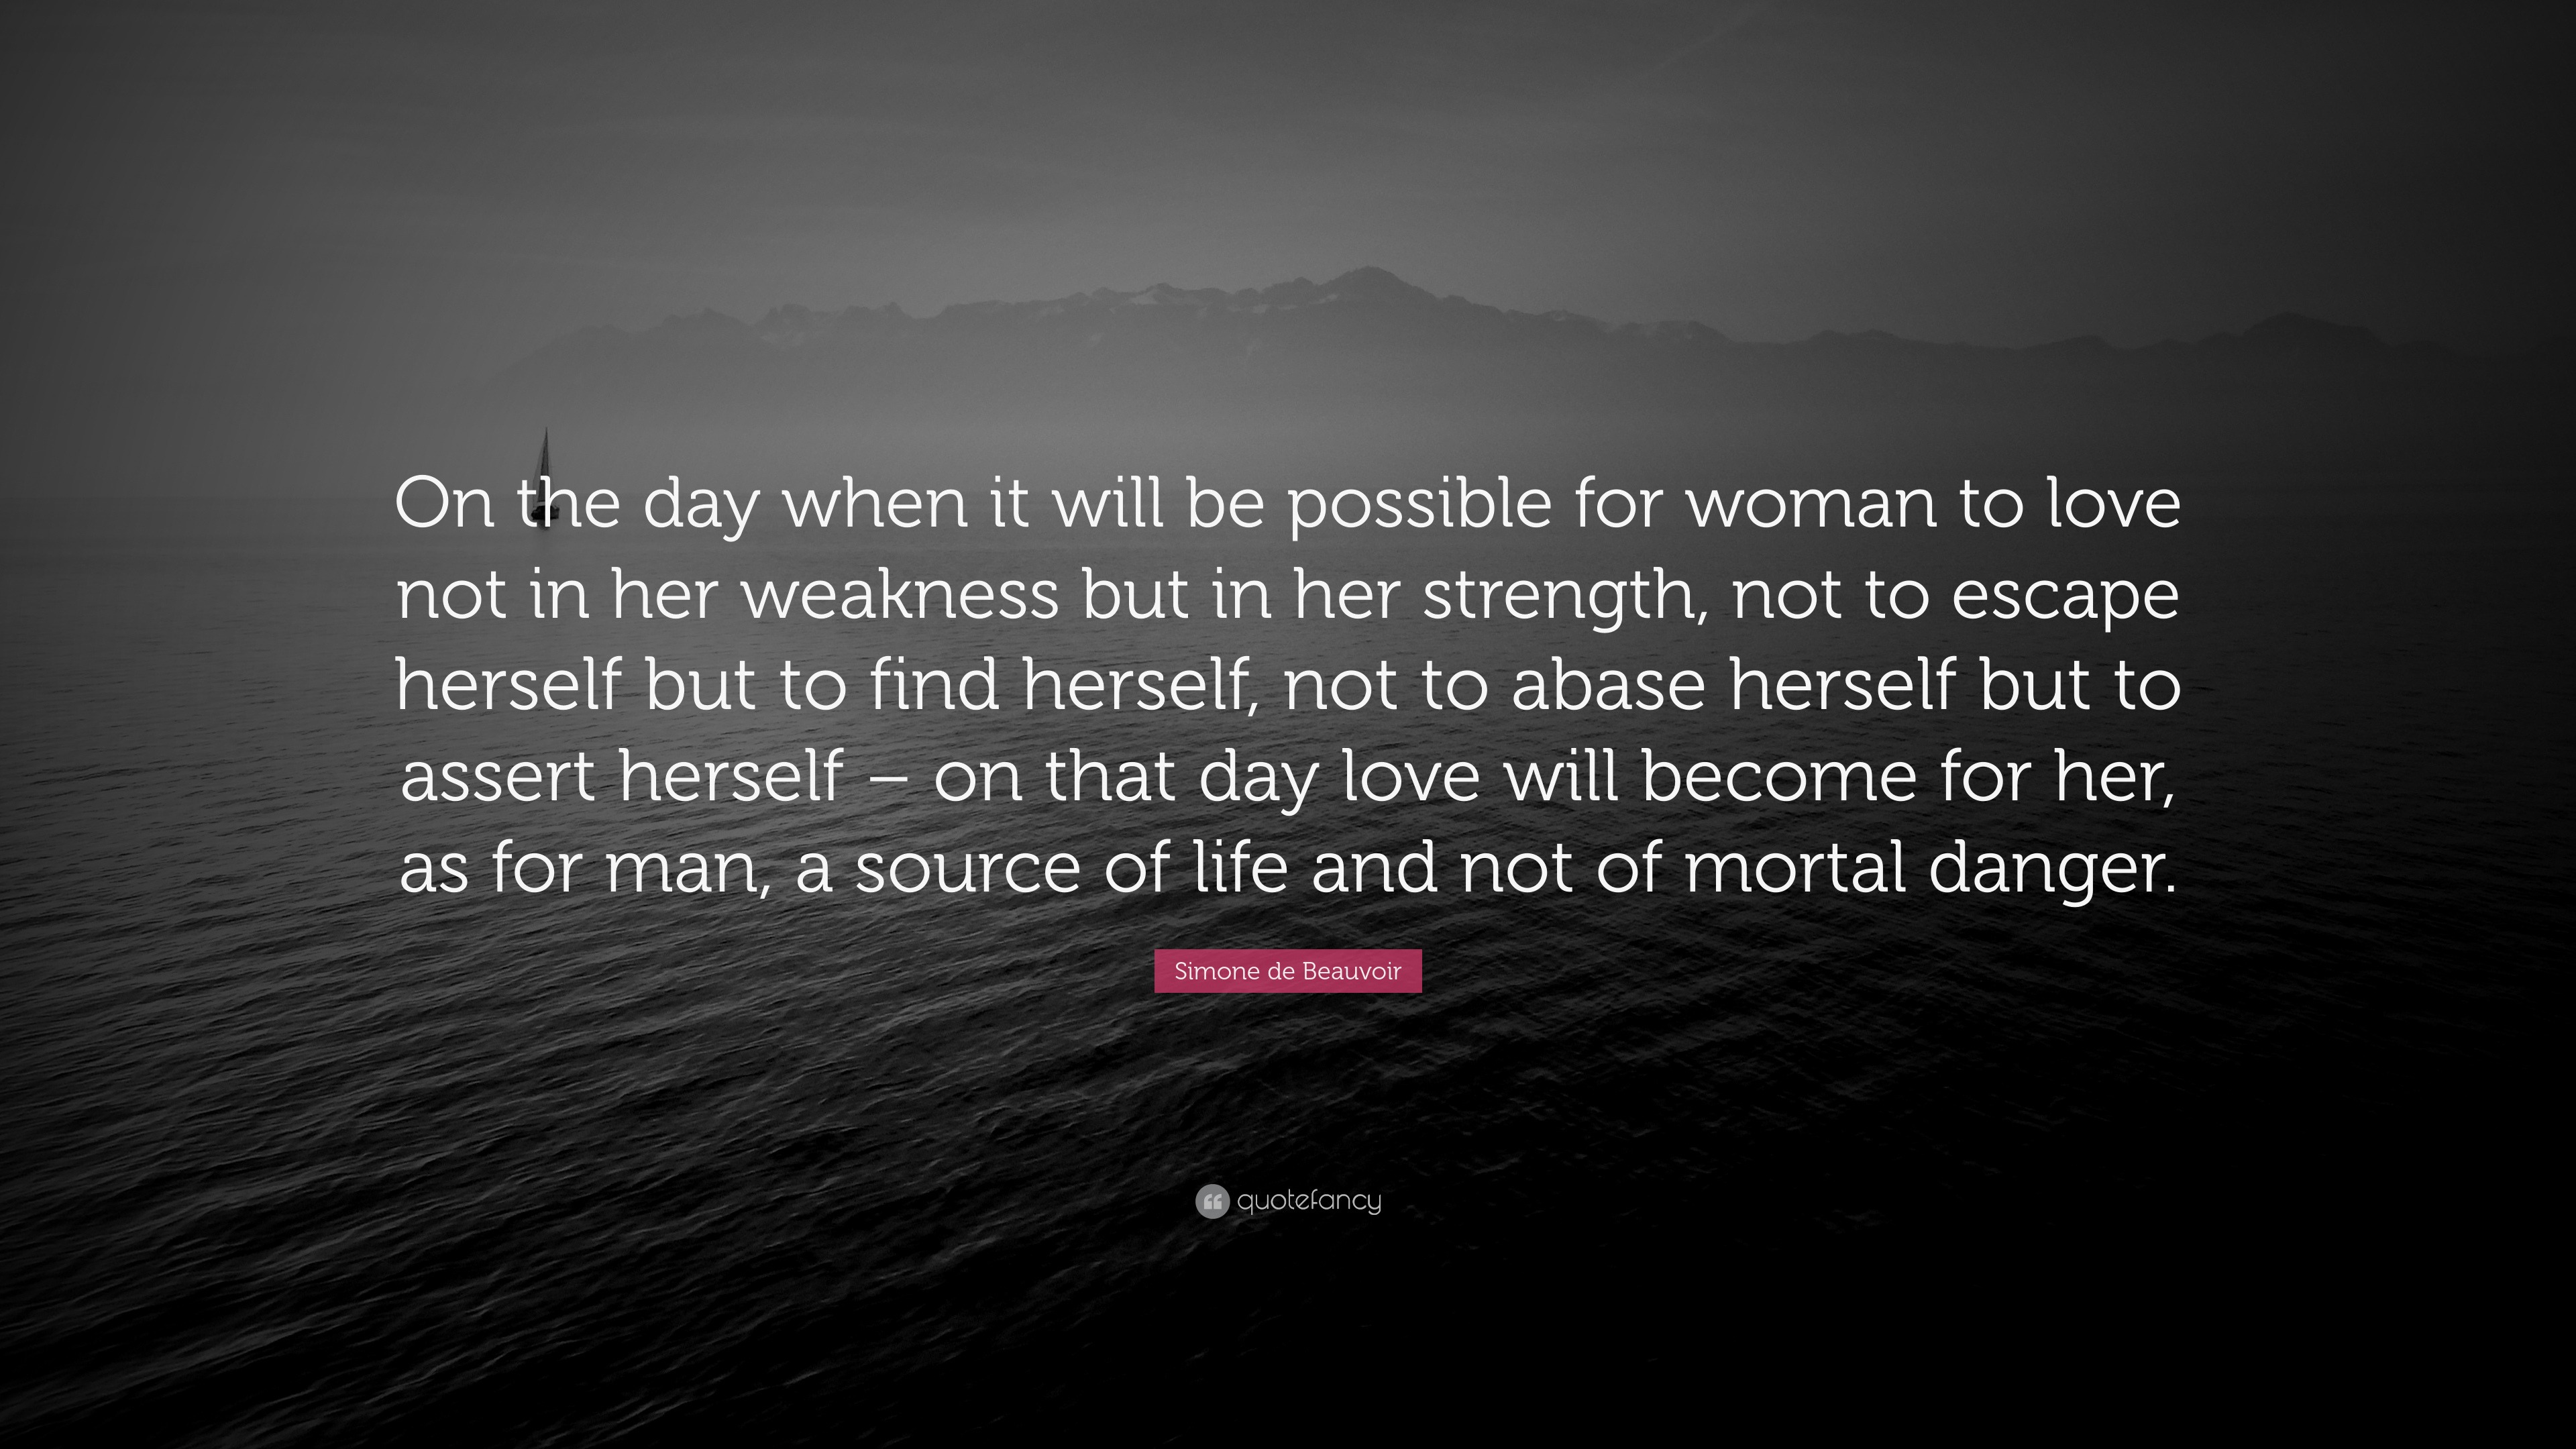 Simone de Beauvoir Quote: “On the day when it will be possible for ...